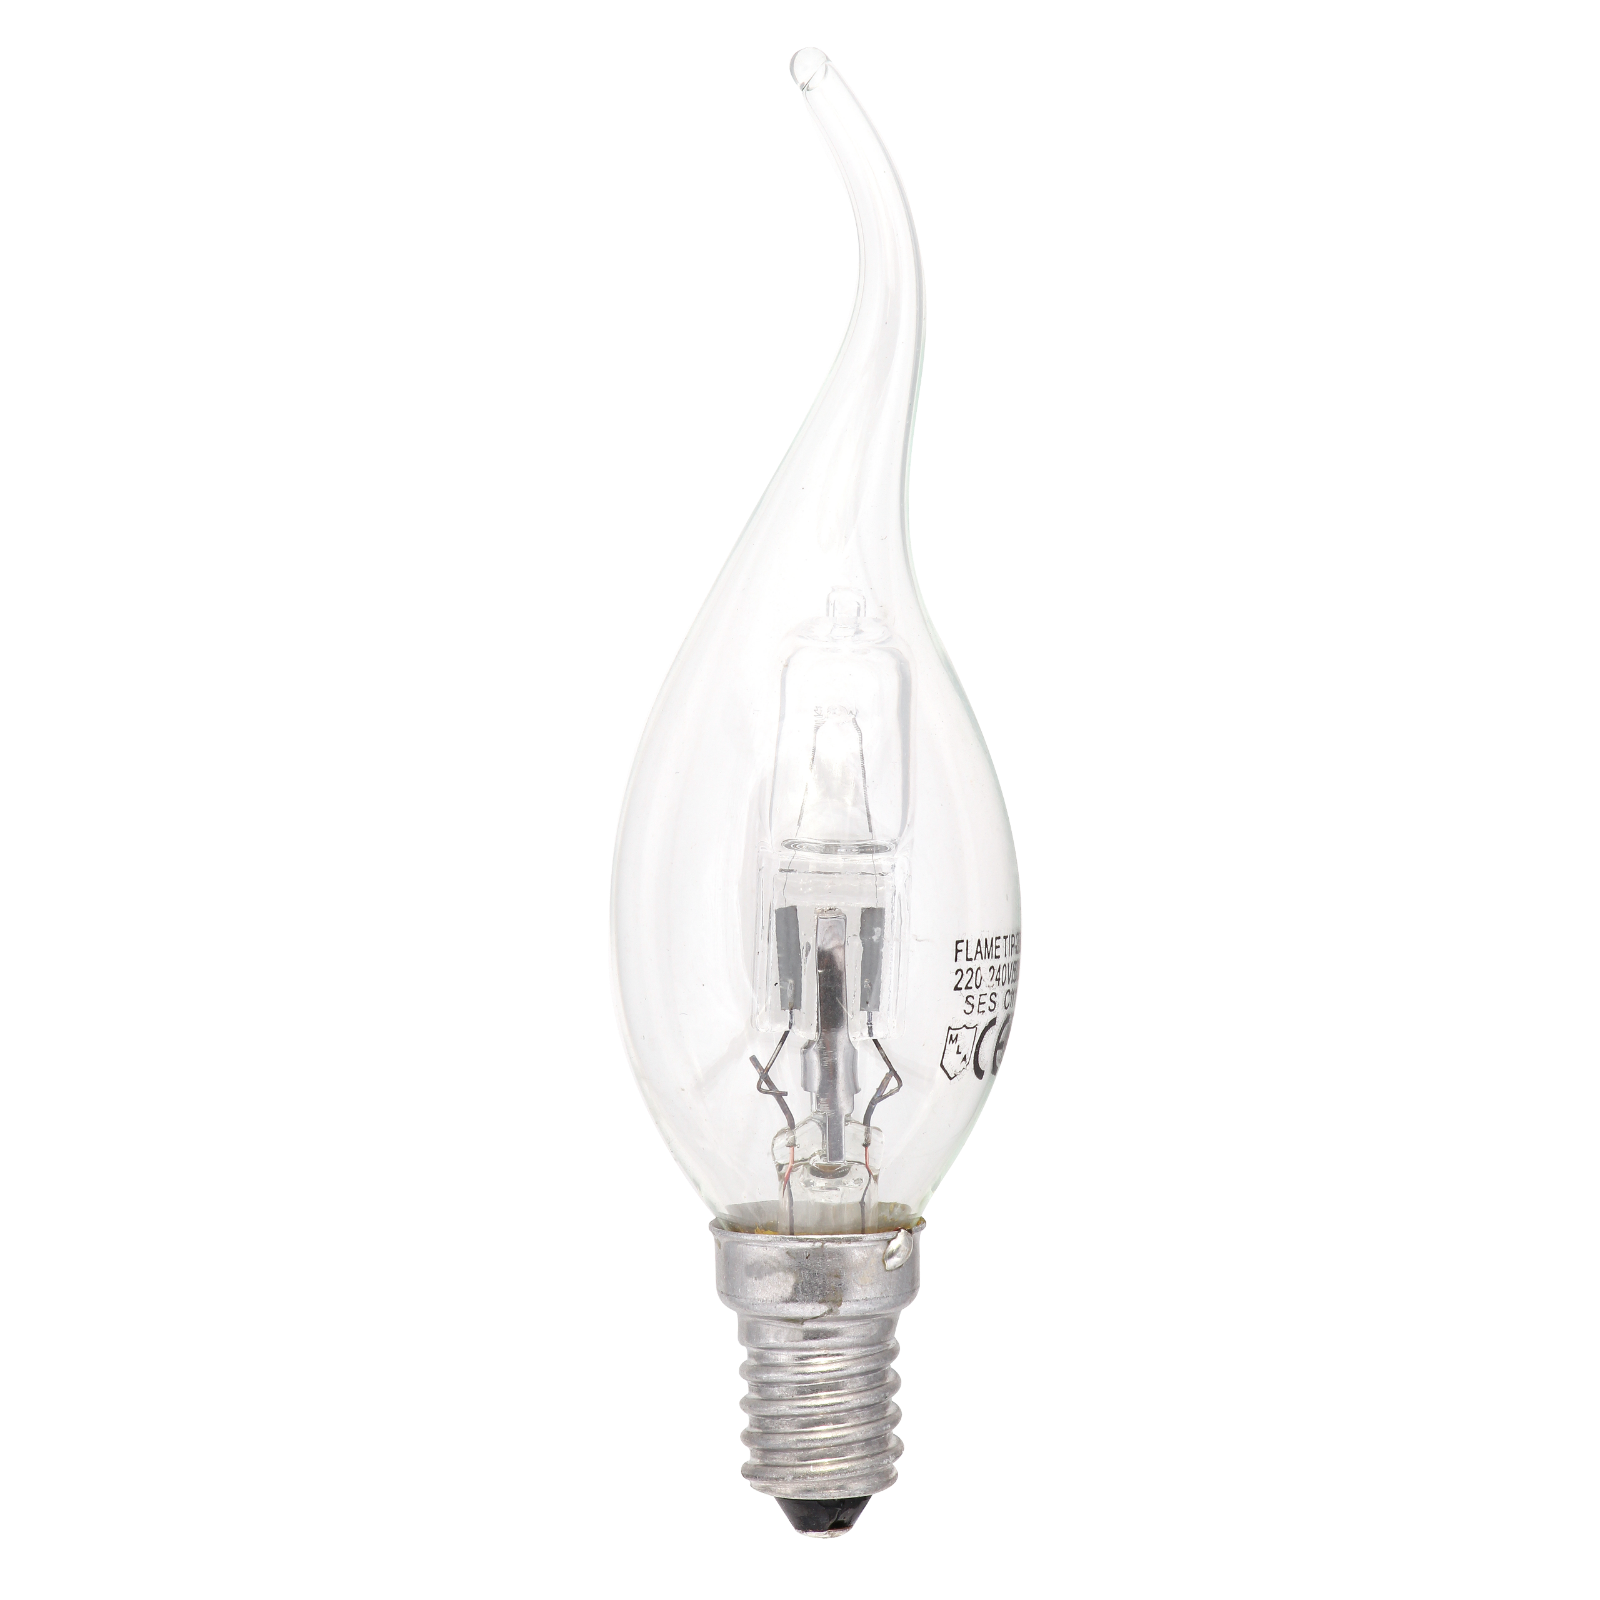 28W Halogen Energy Saving Clear Flame Tipped Lamp SES (equivalent To 40W) - HALO-F28SES - SOLD-OUT!! 